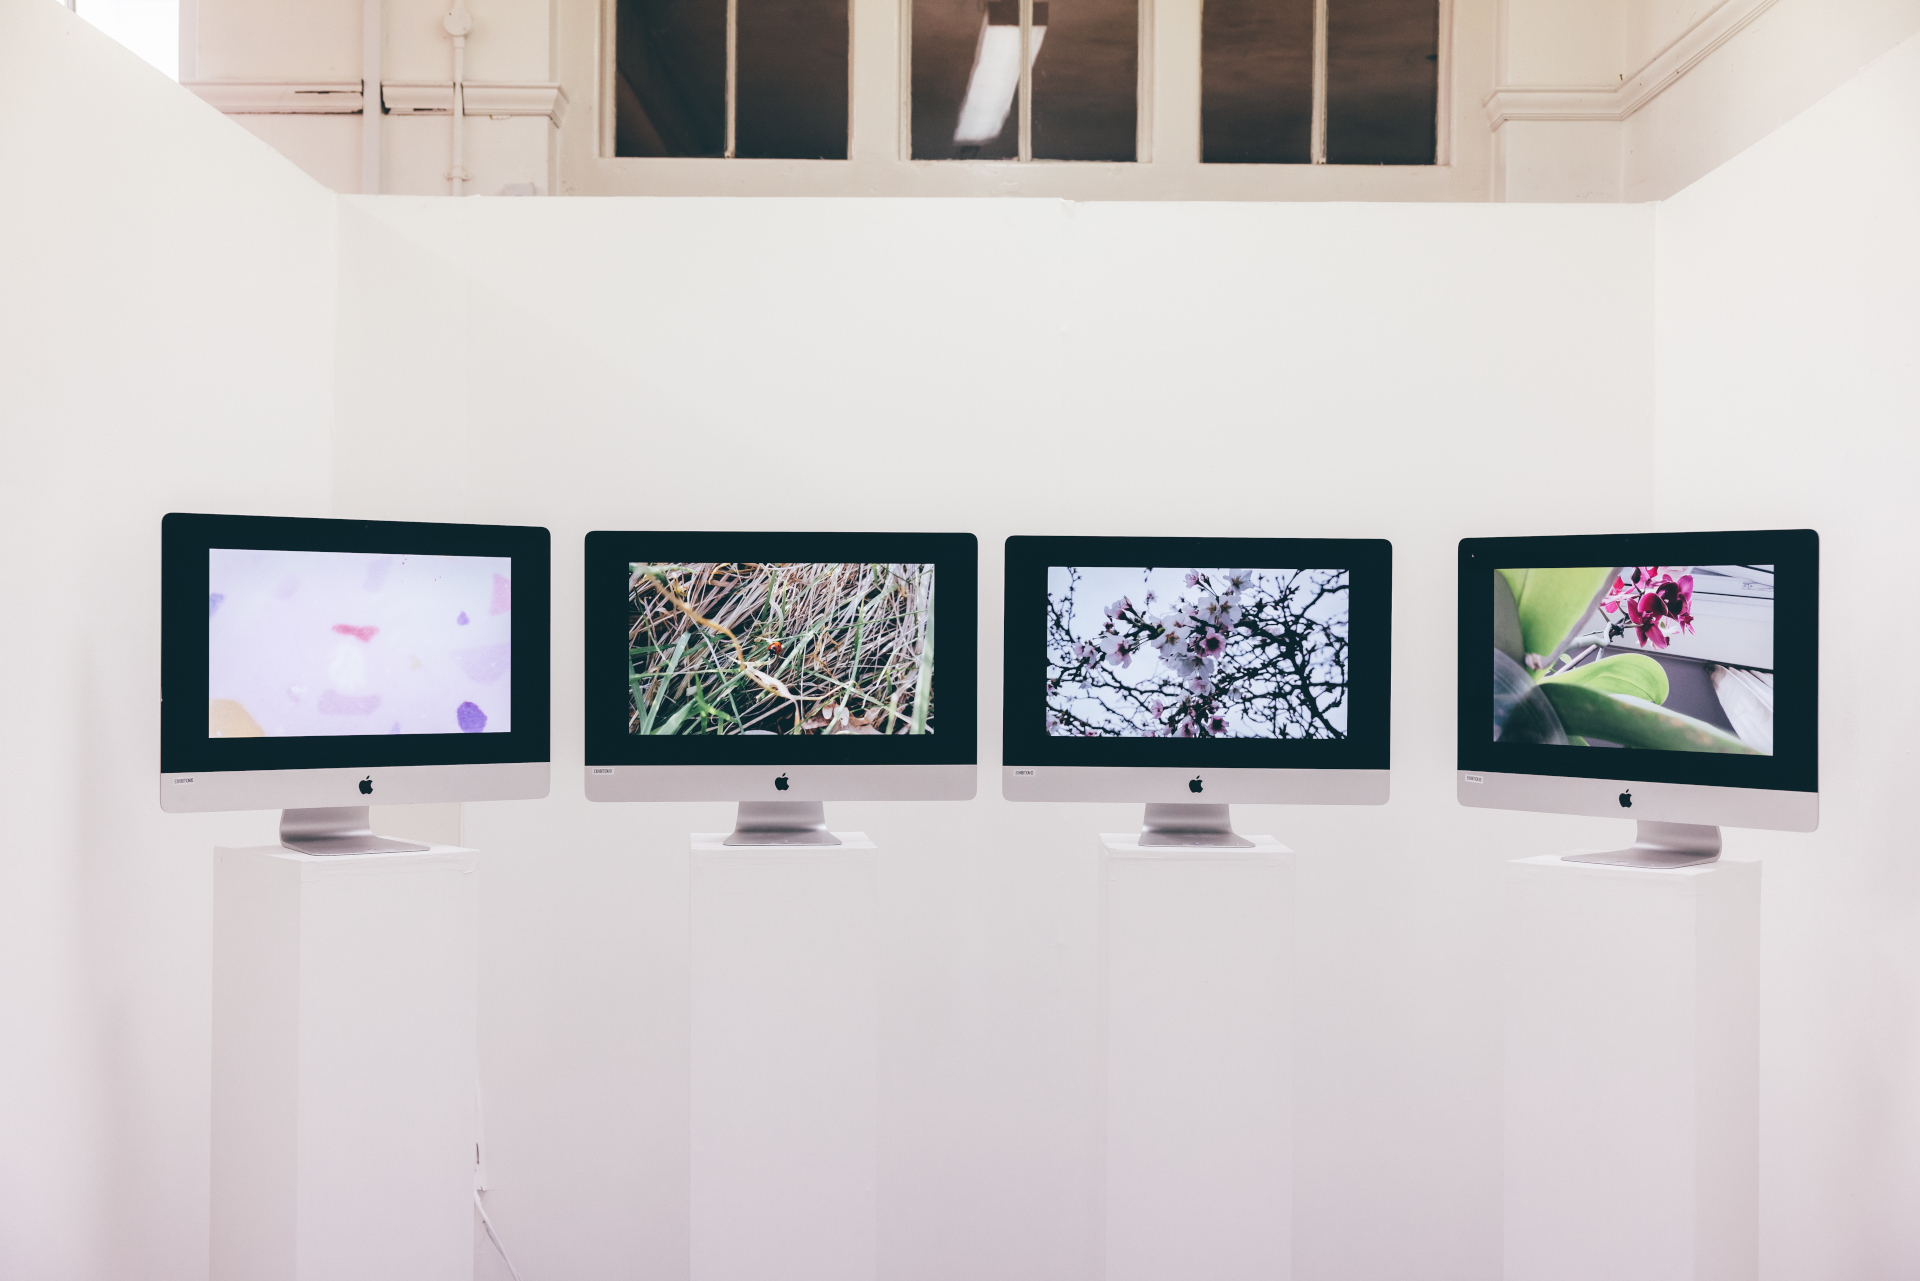 Four monitors showing images of nature